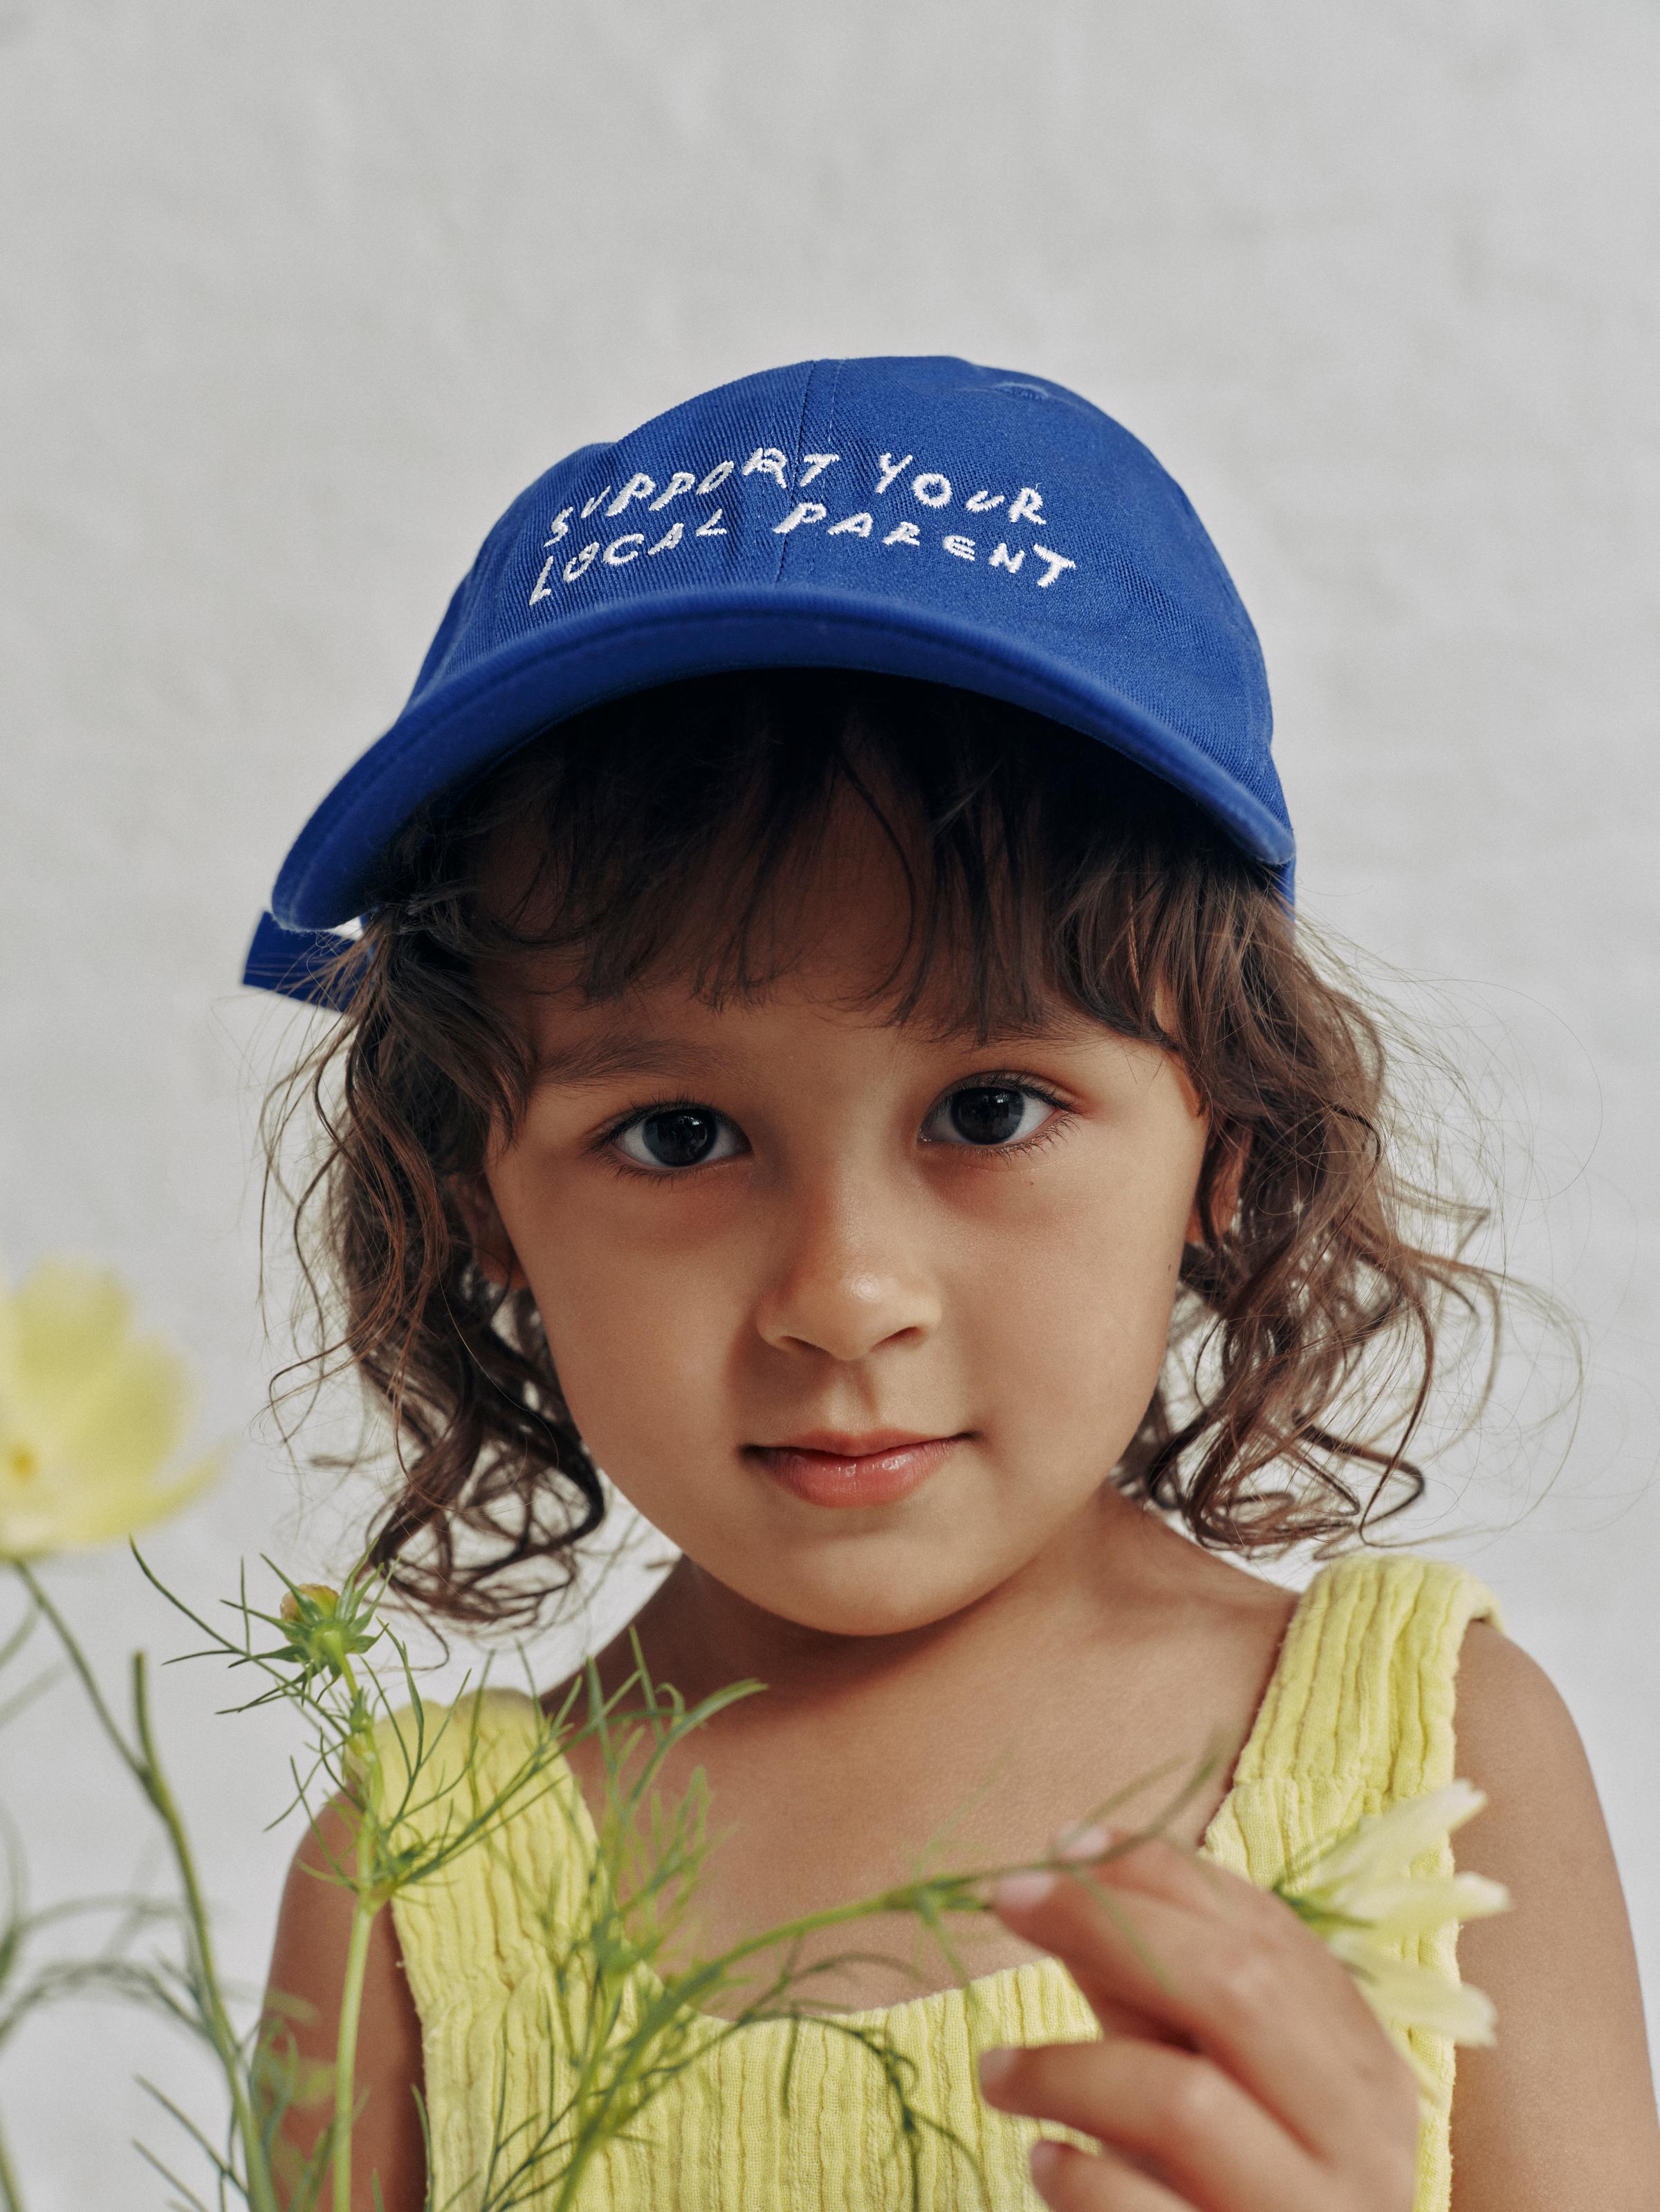 A little girl wearing the SYLP classic cap in electric blue.